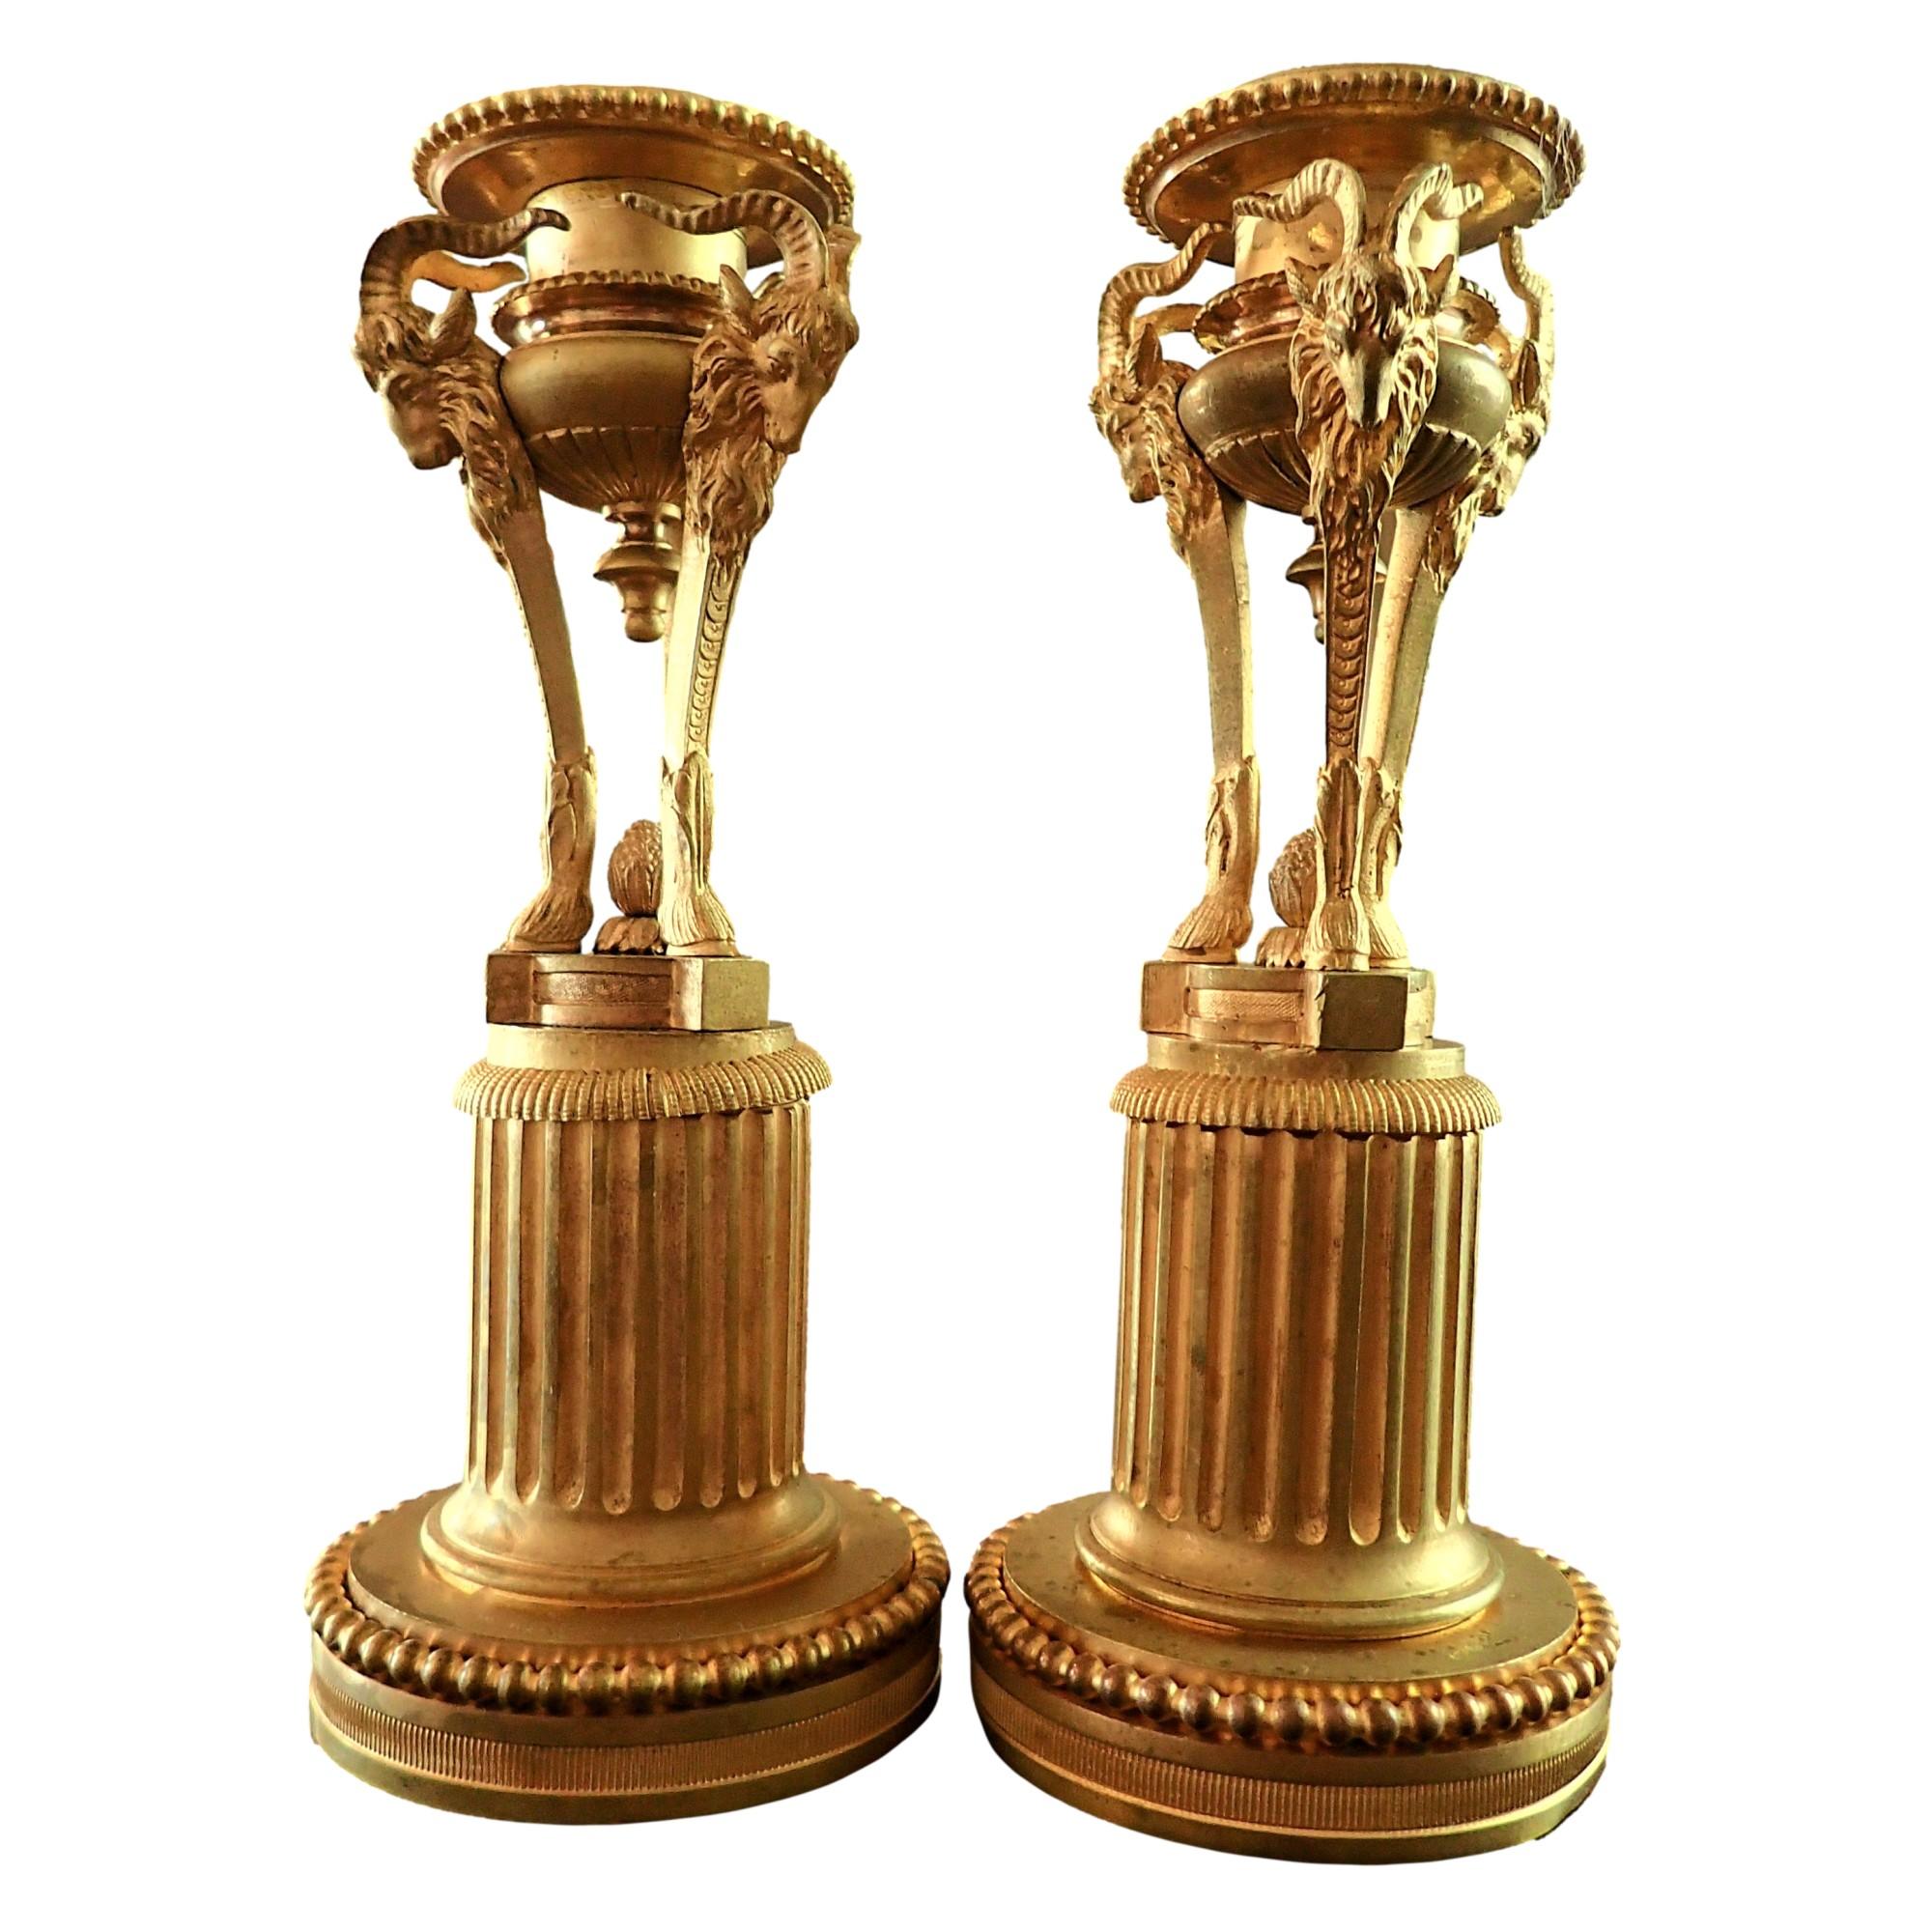 Louis XVI Lovely Pair of Rove Goat Decorated French Gilt Bronze Candlesticks